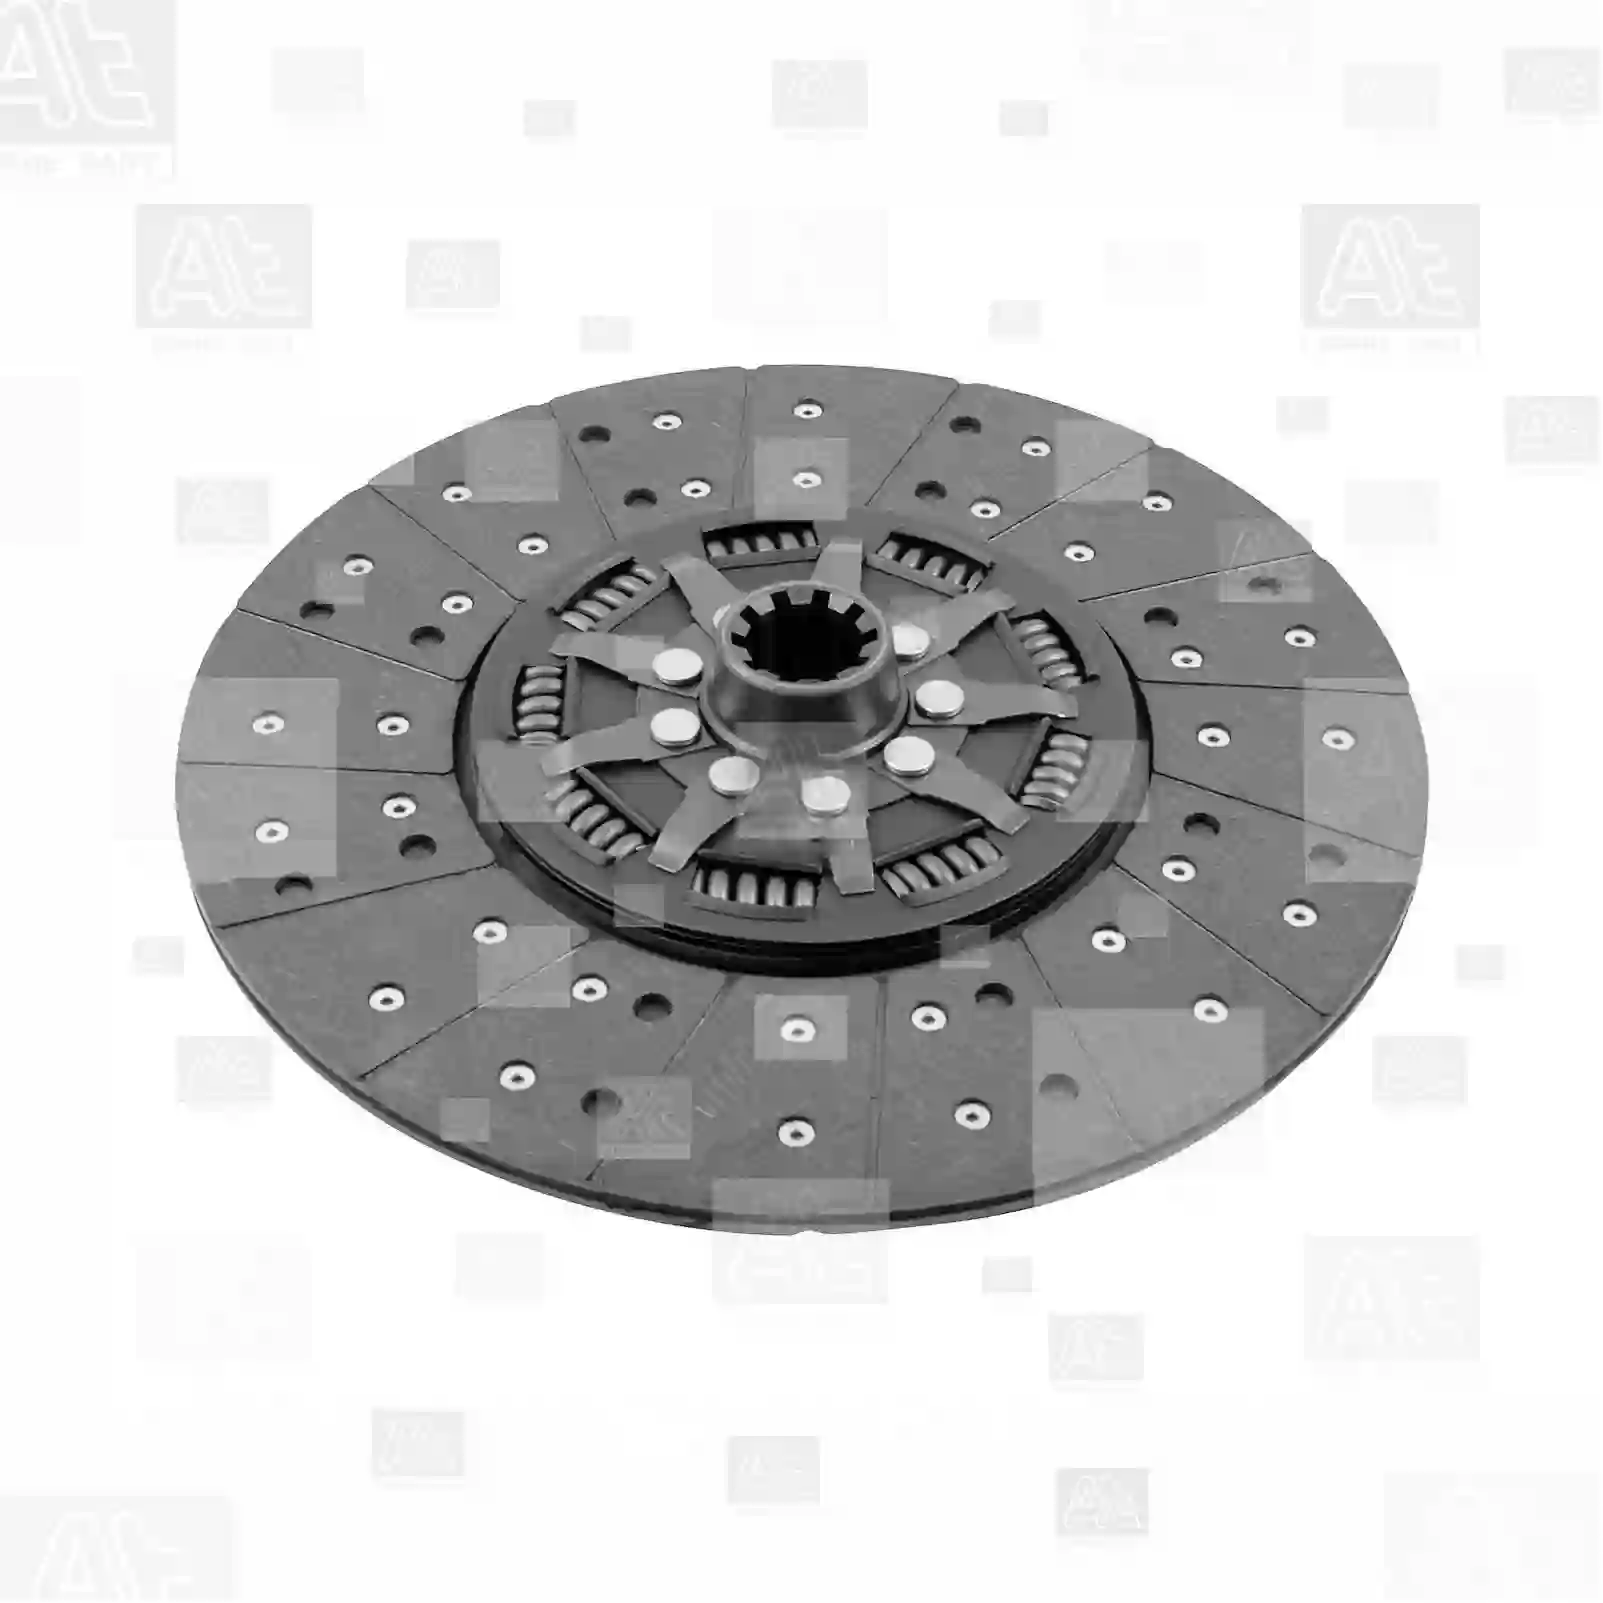 Clutch disc, 77722460, 01260096, 01903850, 01903855, 01903948, 01903949, 02246046, 02246046KZ0148-52, 02476075, 02477936, 42102154, 8751525135, 8751525155, 0890261, 01260096, 01903850, 01903855, 01903948, 01903949, 02476075, 02477936, 42102154, 8751525135, 8751525155, 01260096, 01903850, 01903855, 01903948, 01903949, 02476075, 02477936, 42102154, 8751525135, 8751525155, 81303016005, 0002503203, 0002509103, 0012500203, 0012502703, 0012505703, 0012509703, 0022501303, 0022501403, 0042509003, 0092504003, 009250400380, 8383092000, 614160003, 5052220, 8751525135 ||  77722460 At Spare Part | Engine, Accelerator Pedal, Camshaft, Connecting Rod, Crankcase, Crankshaft, Cylinder Head, Engine Suspension Mountings, Exhaust Manifold, Exhaust Gas Recirculation, Filter Kits, Flywheel Housing, General Overhaul Kits, Engine, Intake Manifold, Oil Cleaner, Oil Cooler, Oil Filter, Oil Pump, Oil Sump, Piston & Liner, Sensor & Switch, Timing Case, Turbocharger, Cooling System, Belt Tensioner, Coolant Filter, Coolant Pipe, Corrosion Prevention Agent, Drive, Expansion Tank, Fan, Intercooler, Monitors & Gauges, Radiator, Thermostat, V-Belt / Timing belt, Water Pump, Fuel System, Electronical Injector Unit, Feed Pump, Fuel Filter, cpl., Fuel Gauge Sender,  Fuel Line, Fuel Pump, Fuel Tank, Injection Line Kit, Injection Pump, Exhaust System, Clutch & Pedal, Gearbox, Propeller Shaft, Axles, Brake System, Hubs & Wheels, Suspension, Leaf Spring, Universal Parts / Accessories, Steering, Electrical System, Cabin Clutch disc, 77722460, 01260096, 01903850, 01903855, 01903948, 01903949, 02246046, 02246046KZ0148-52, 02476075, 02477936, 42102154, 8751525135, 8751525155, 0890261, 01260096, 01903850, 01903855, 01903948, 01903949, 02476075, 02477936, 42102154, 8751525135, 8751525155, 01260096, 01903850, 01903855, 01903948, 01903949, 02476075, 02477936, 42102154, 8751525135, 8751525155, 81303016005, 0002503203, 0002509103, 0012500203, 0012502703, 0012505703, 0012509703, 0022501303, 0022501403, 0042509003, 0092504003, 009250400380, 8383092000, 614160003, 5052220, 8751525135 ||  77722460 At Spare Part | Engine, Accelerator Pedal, Camshaft, Connecting Rod, Crankcase, Crankshaft, Cylinder Head, Engine Suspension Mountings, Exhaust Manifold, Exhaust Gas Recirculation, Filter Kits, Flywheel Housing, General Overhaul Kits, Engine, Intake Manifold, Oil Cleaner, Oil Cooler, Oil Filter, Oil Pump, Oil Sump, Piston & Liner, Sensor & Switch, Timing Case, Turbocharger, Cooling System, Belt Tensioner, Coolant Filter, Coolant Pipe, Corrosion Prevention Agent, Drive, Expansion Tank, Fan, Intercooler, Monitors & Gauges, Radiator, Thermostat, V-Belt / Timing belt, Water Pump, Fuel System, Electronical Injector Unit, Feed Pump, Fuel Filter, cpl., Fuel Gauge Sender,  Fuel Line, Fuel Pump, Fuel Tank, Injection Line Kit, Injection Pump, Exhaust System, Clutch & Pedal, Gearbox, Propeller Shaft, Axles, Brake System, Hubs & Wheels, Suspension, Leaf Spring, Universal Parts / Accessories, Steering, Electrical System, Cabin